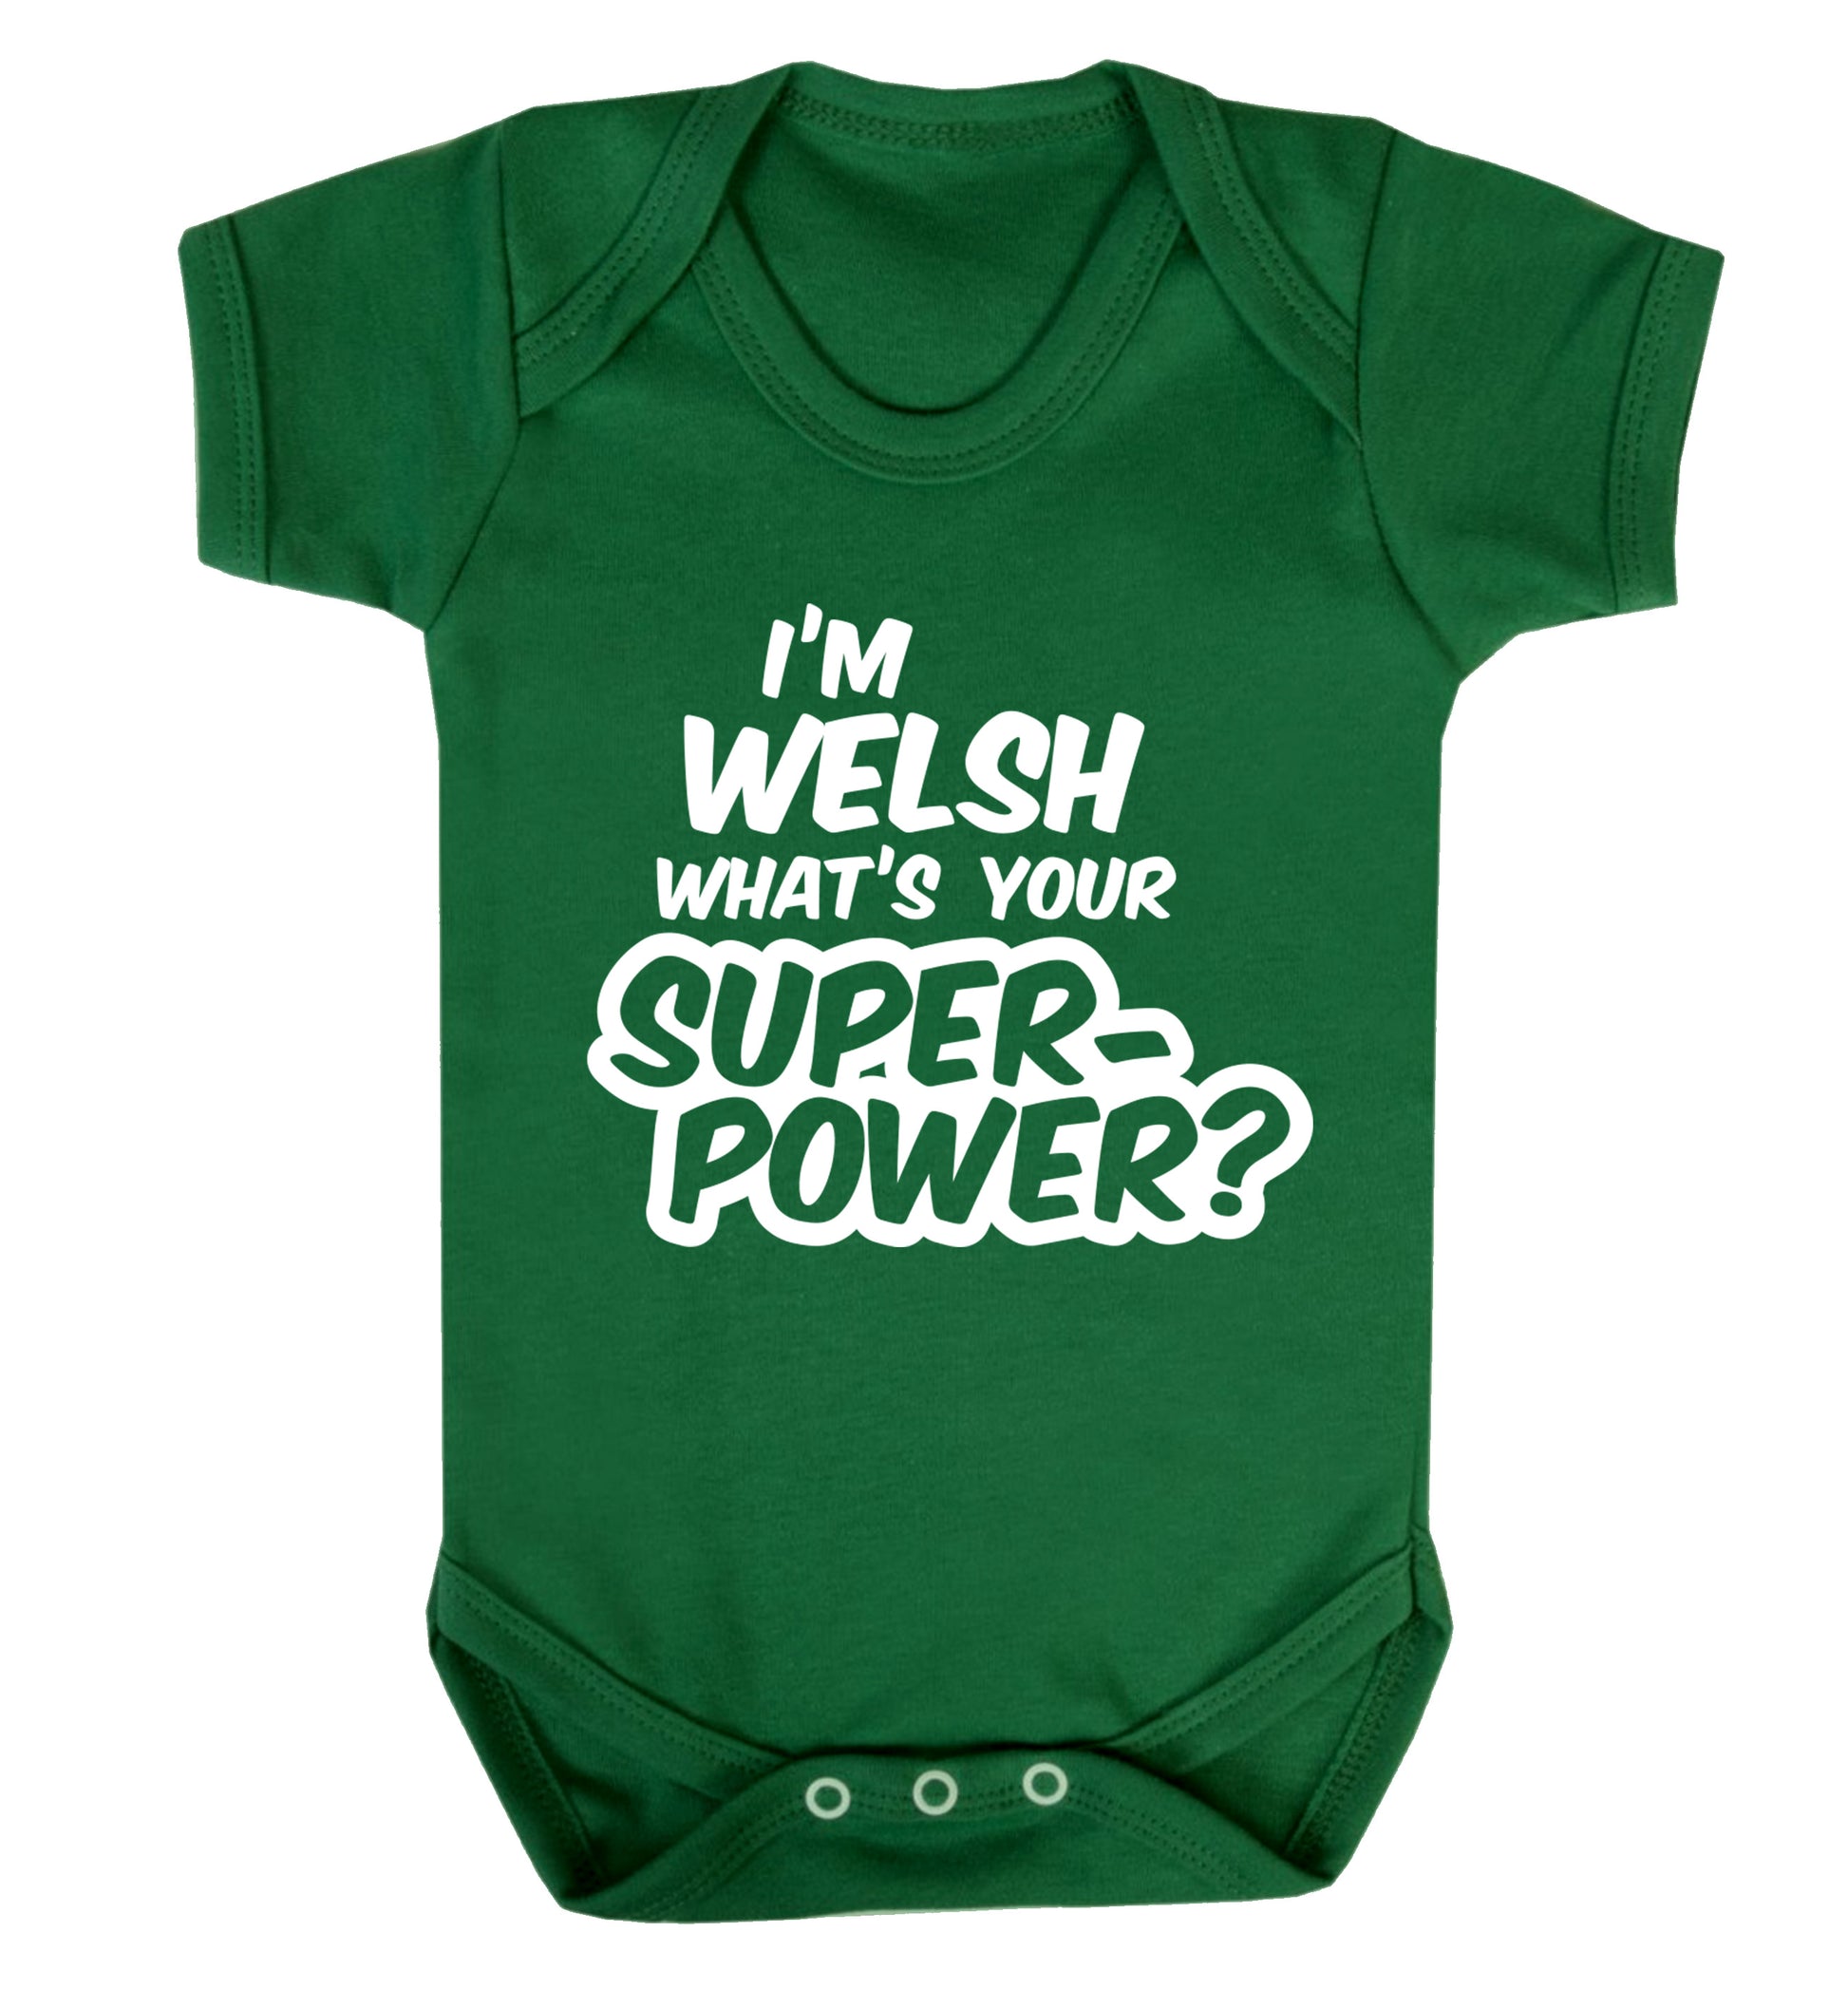 I'm Welsh what's your superpower? Baby Vest green 18-24 months